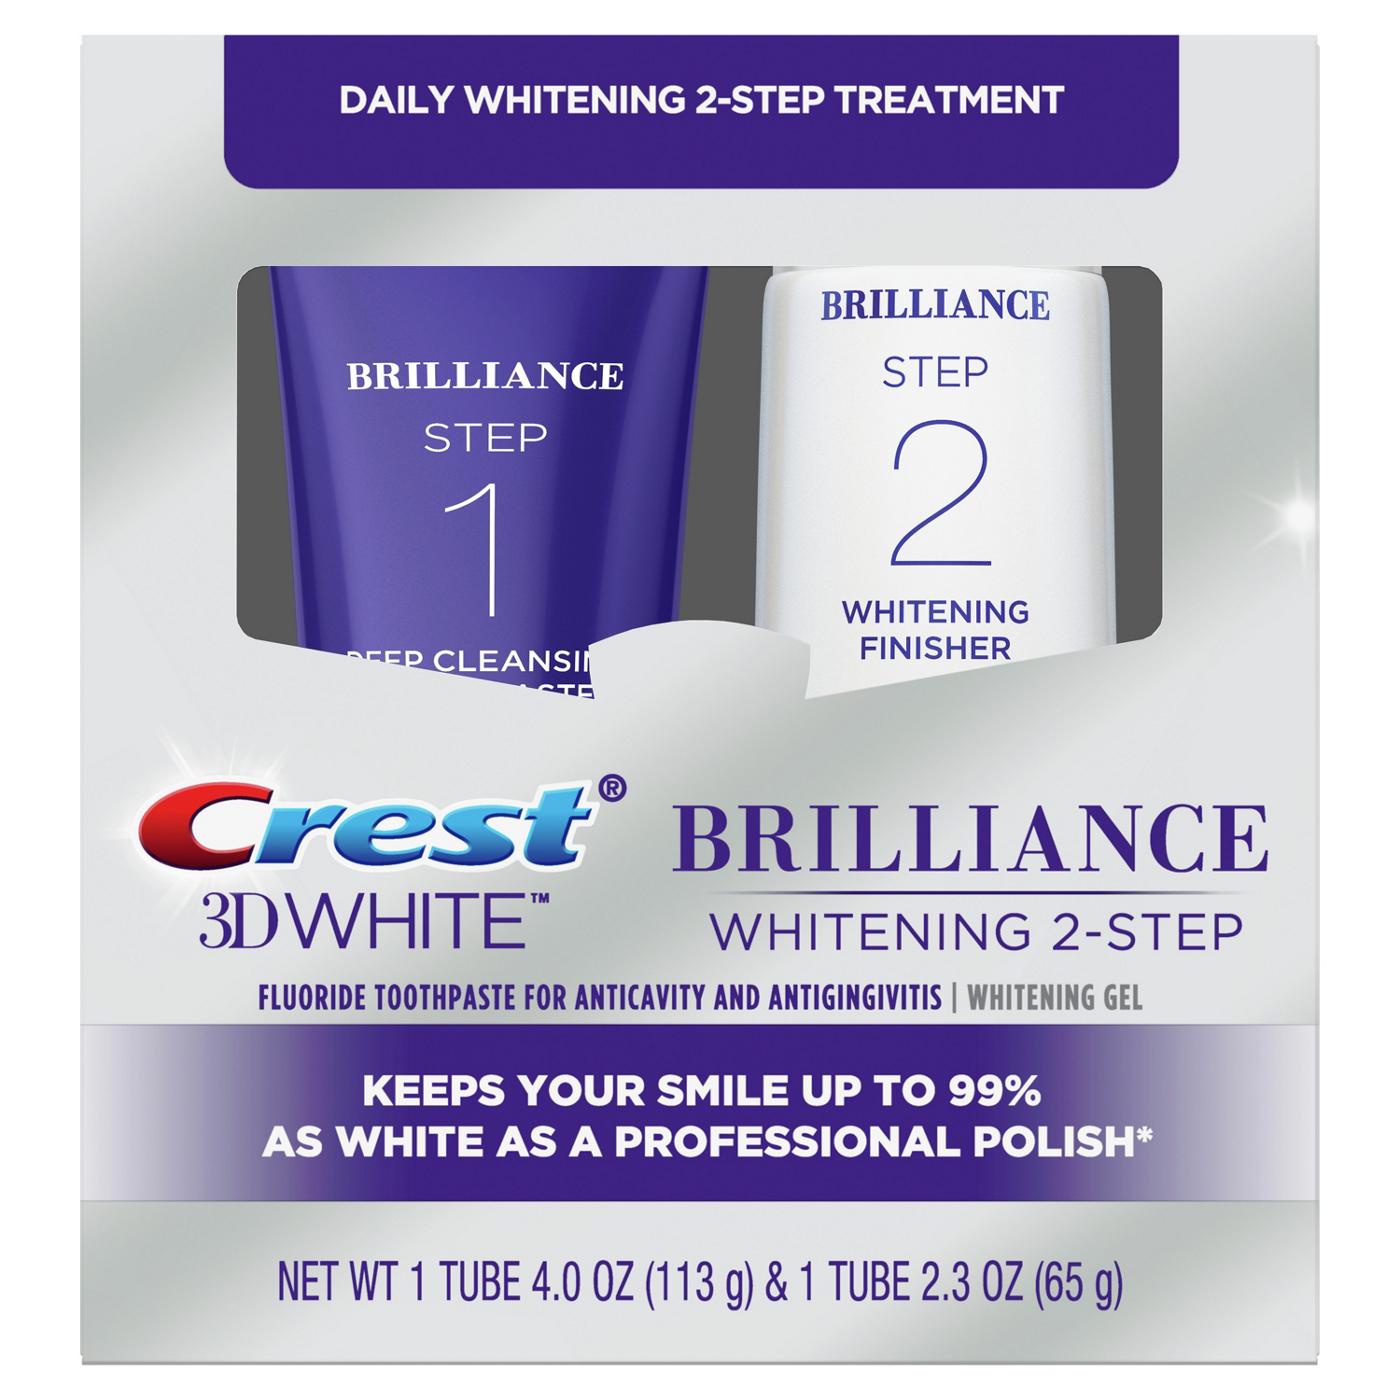 Crest 3D White Brilliance Whitening 2-Step System; image 1 of 9